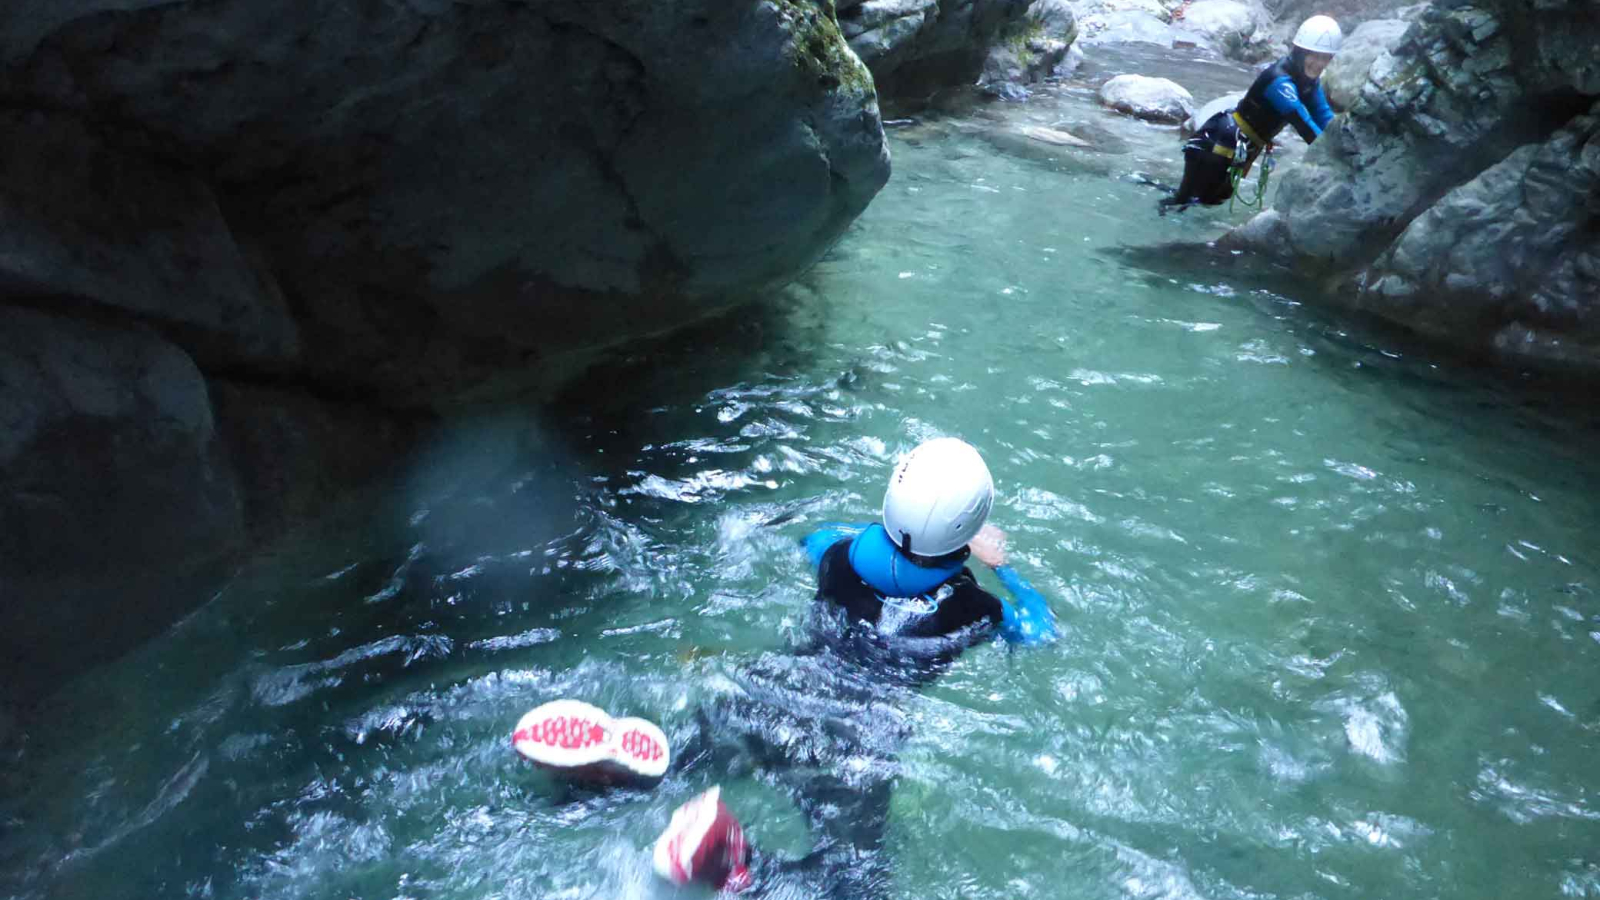 Canyoning family discovery